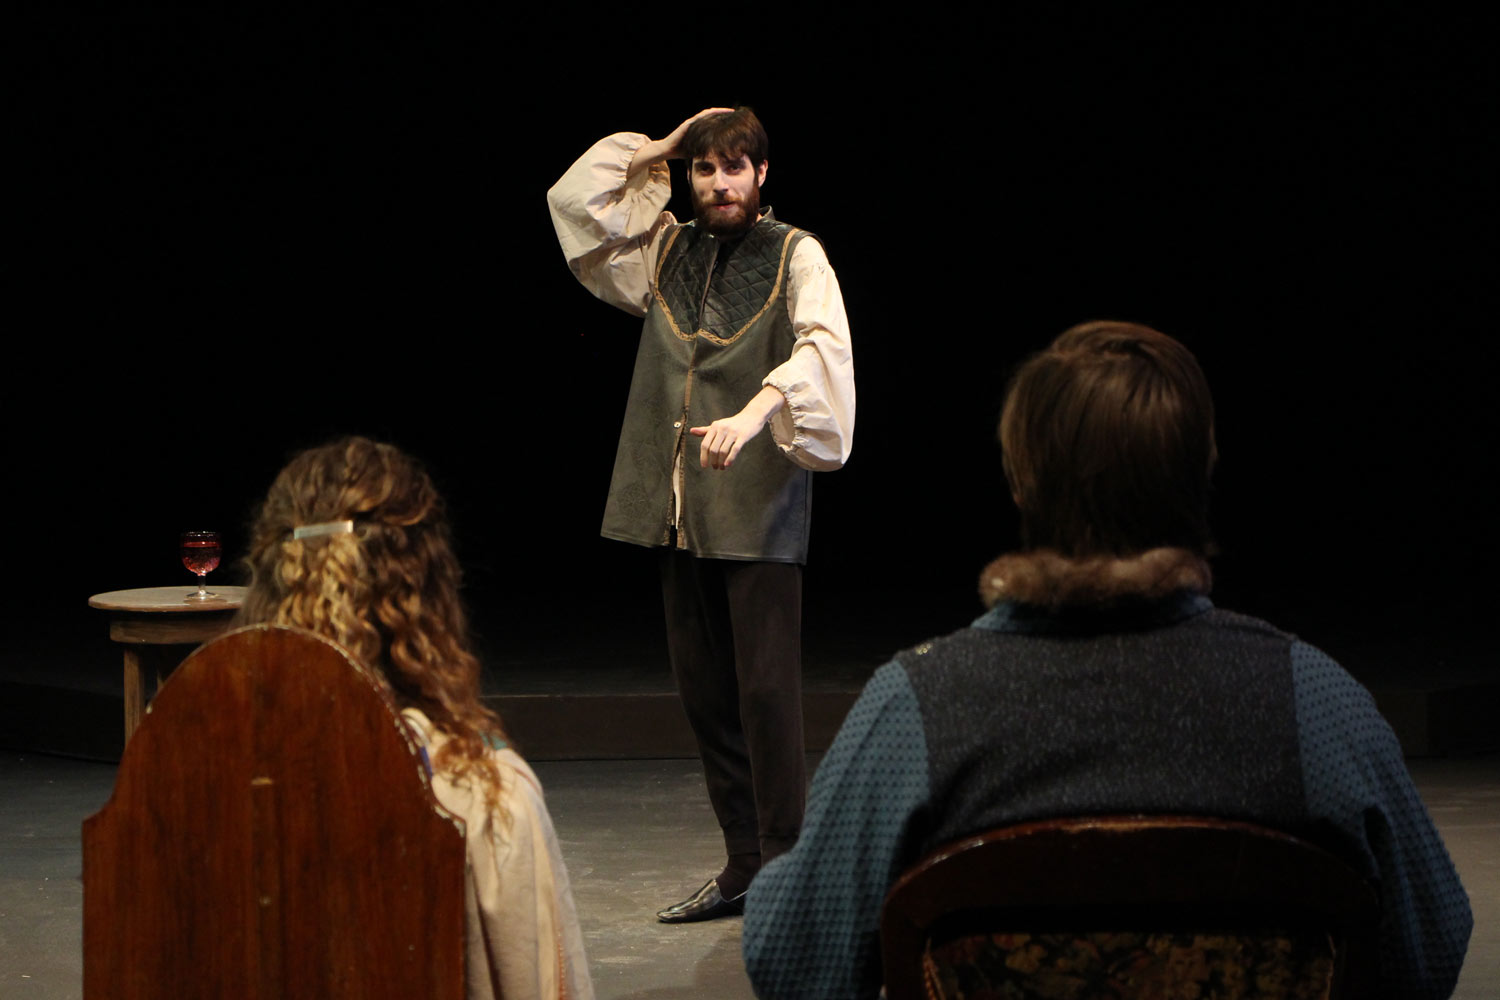 Colin Gibbings performs as Geoffrey Chaucer before a campus audience and actors in the roles of King Richard and Queen Anne. Credit: Christopher Putnam.